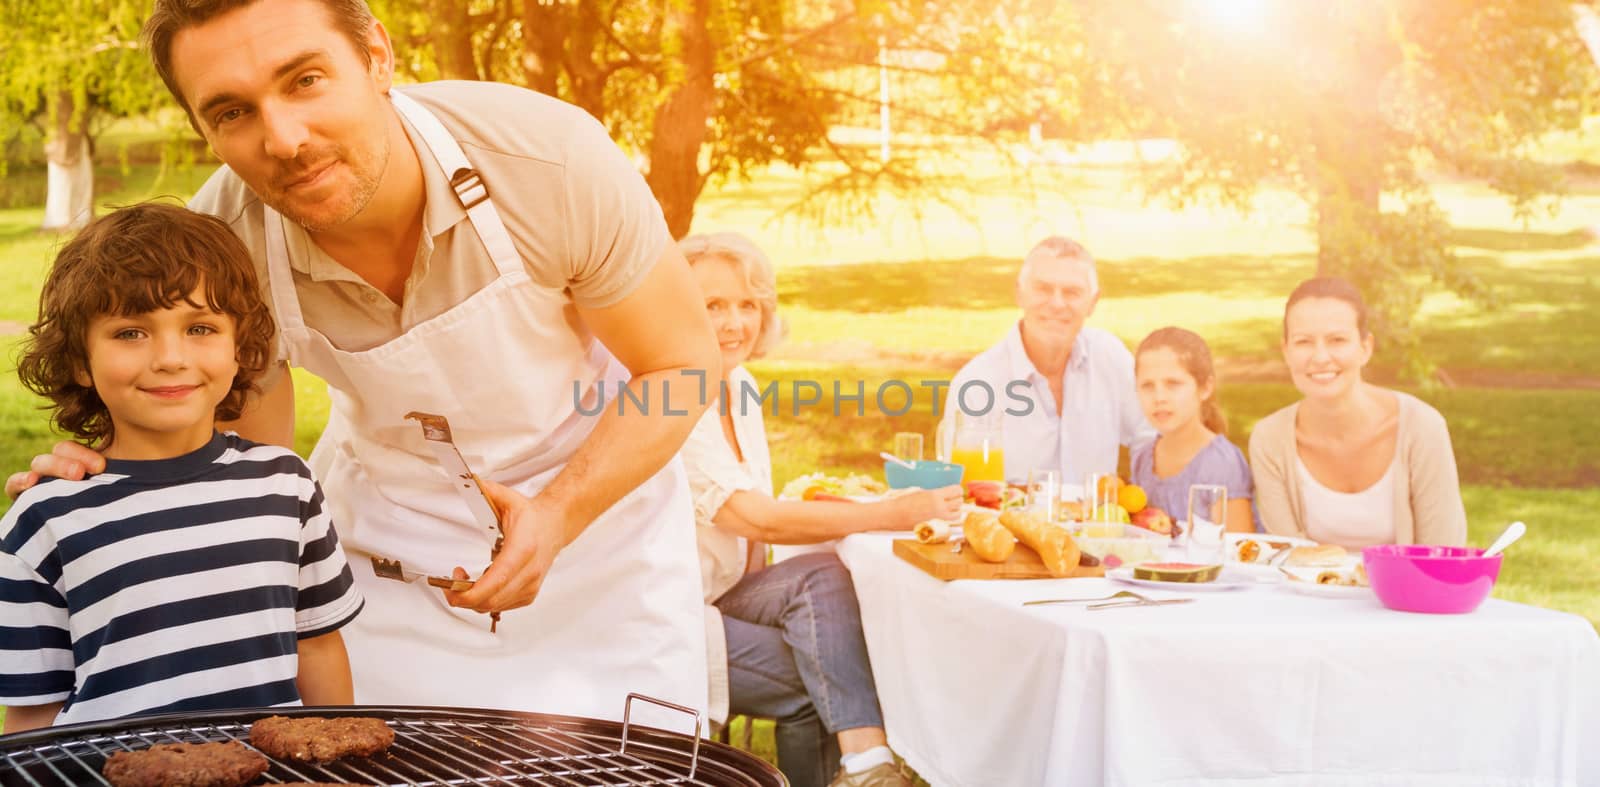 Father and son at barbecue grill with extended family having lunch in the park